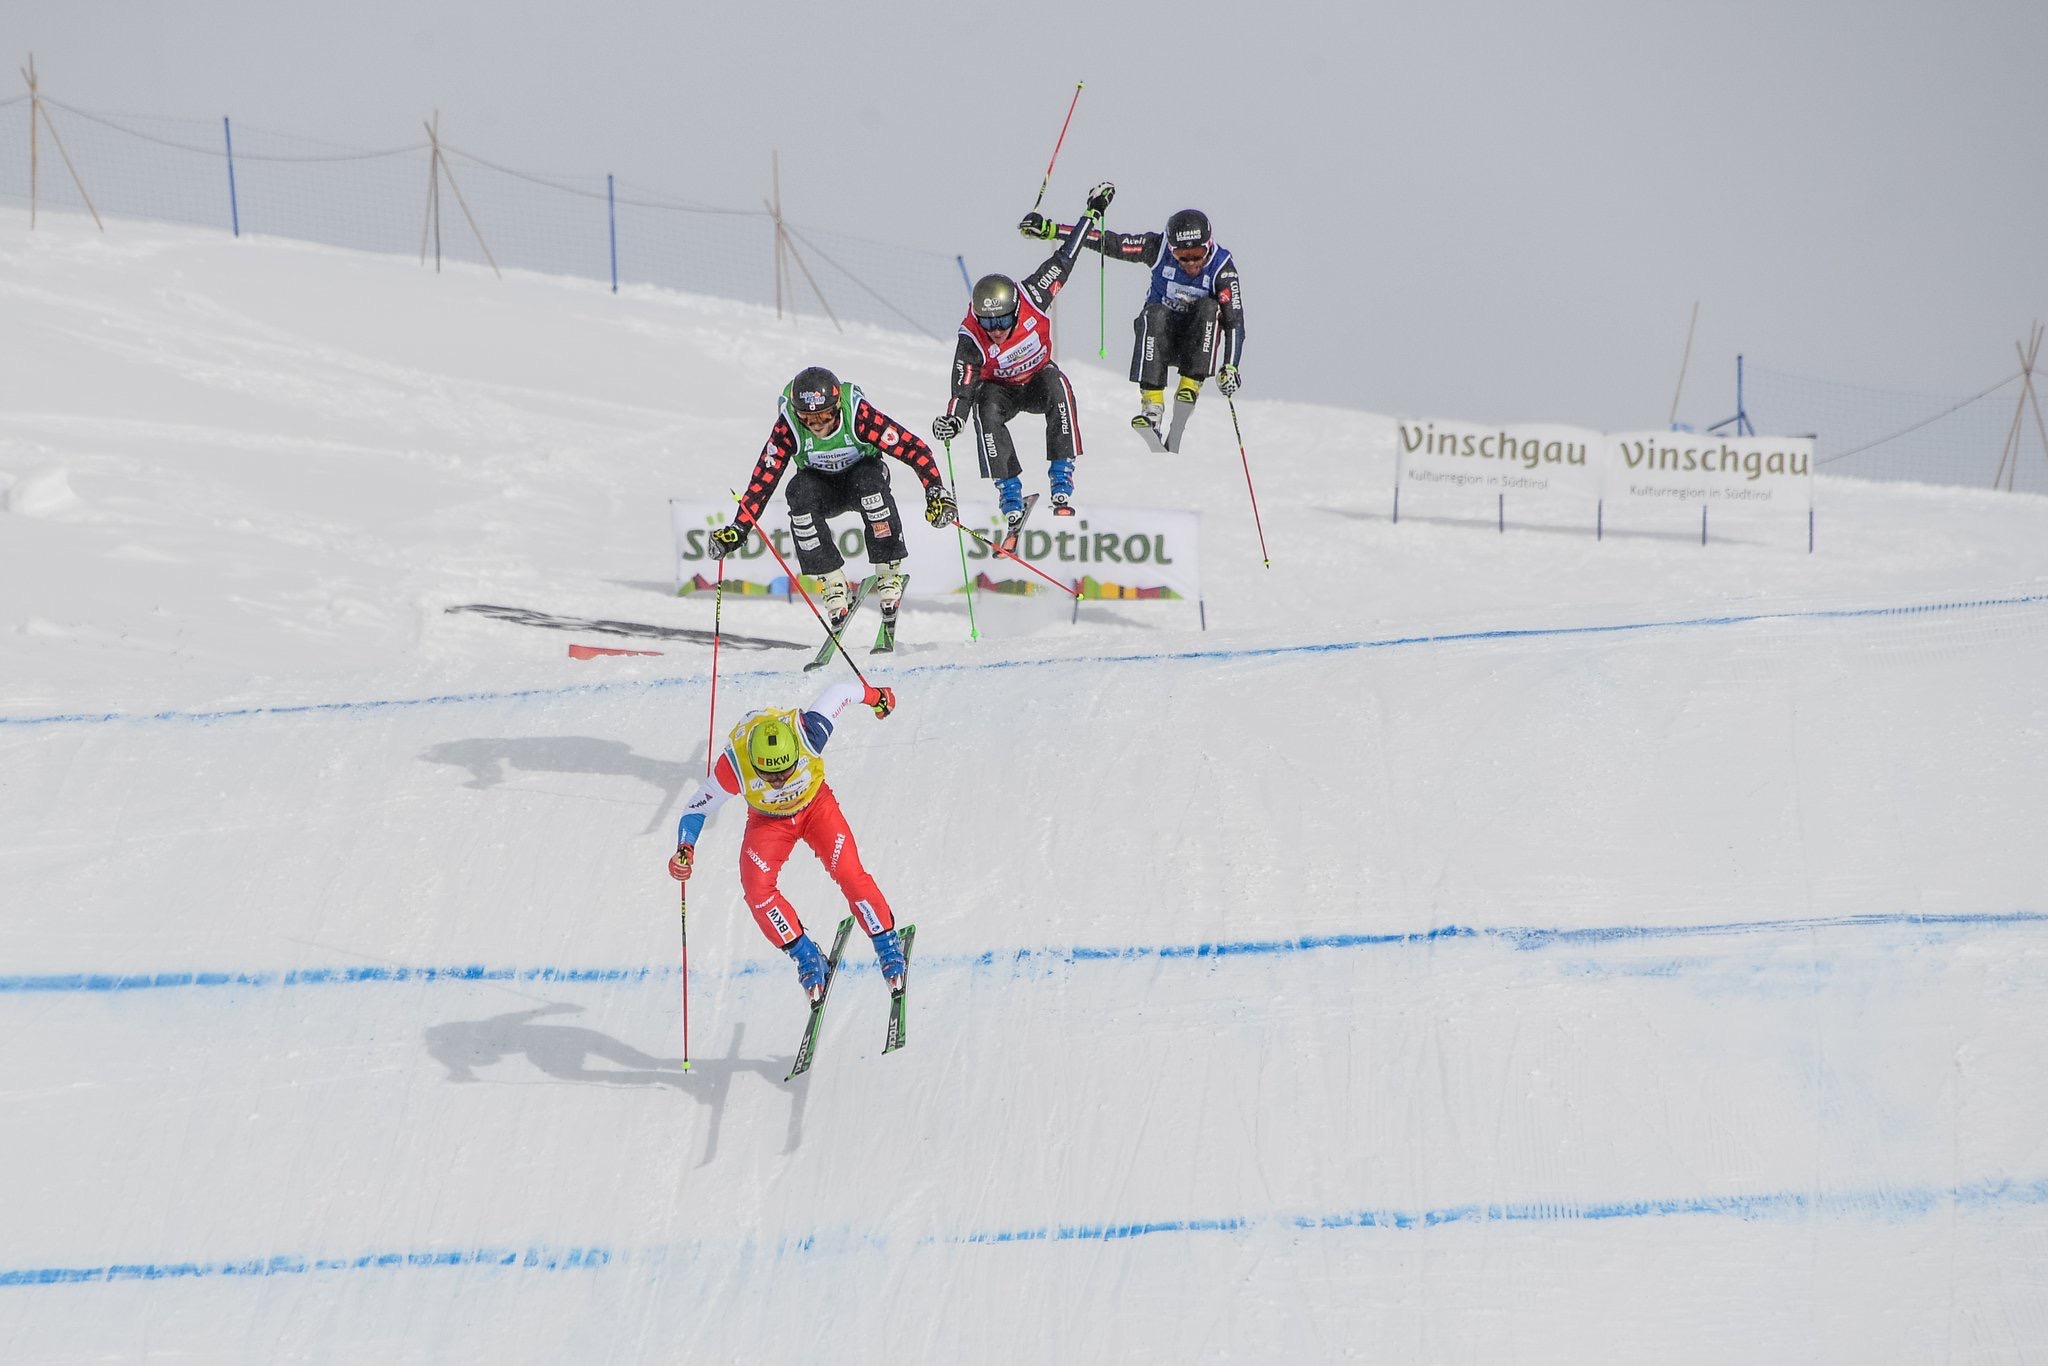 Brady Leman races to a second place finish at the ski cross World Cup in Watles, Italy